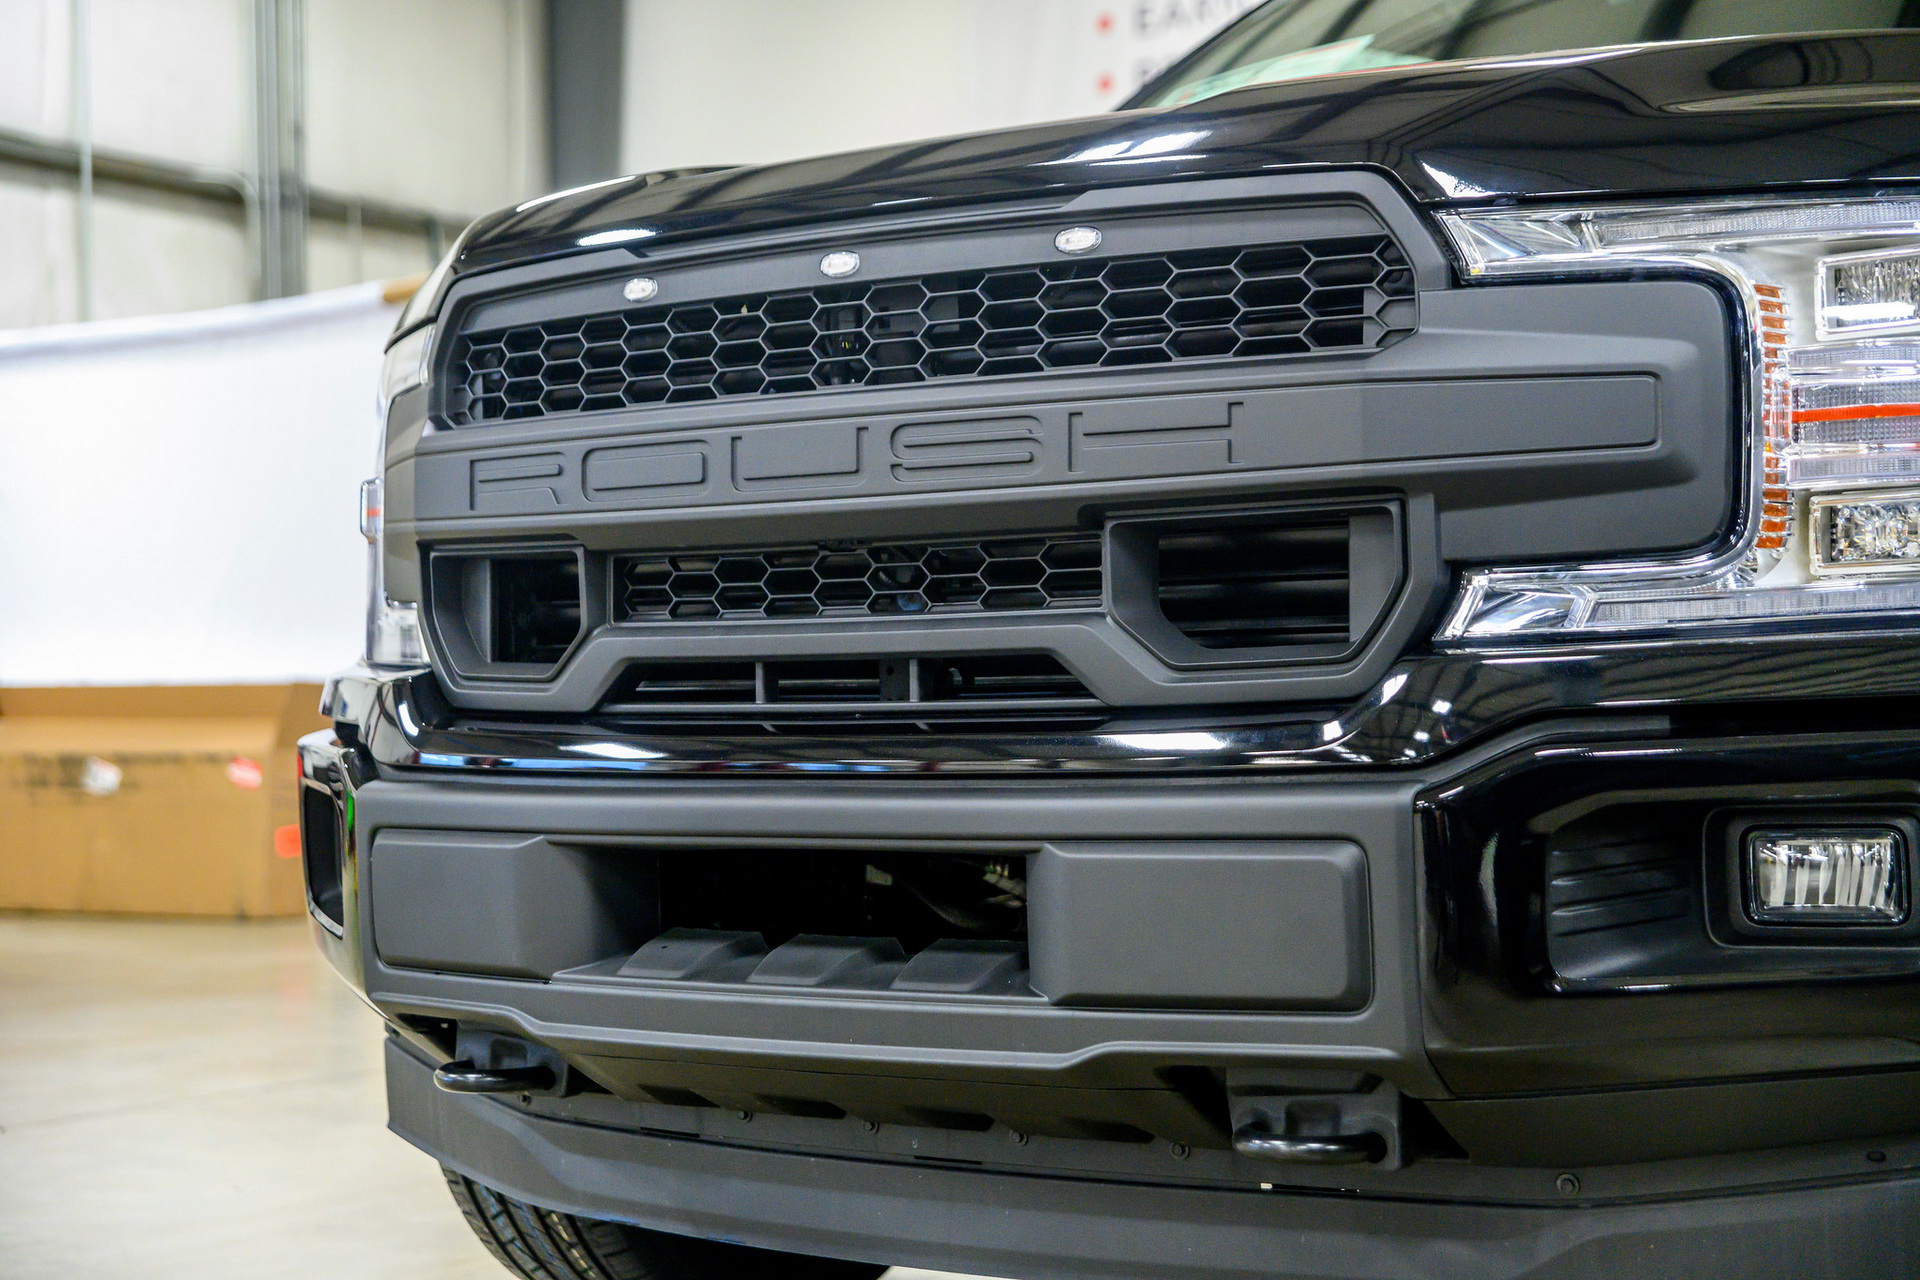 Roush Unveils 2020 F150 SC And Nitemare Trucks, Both With